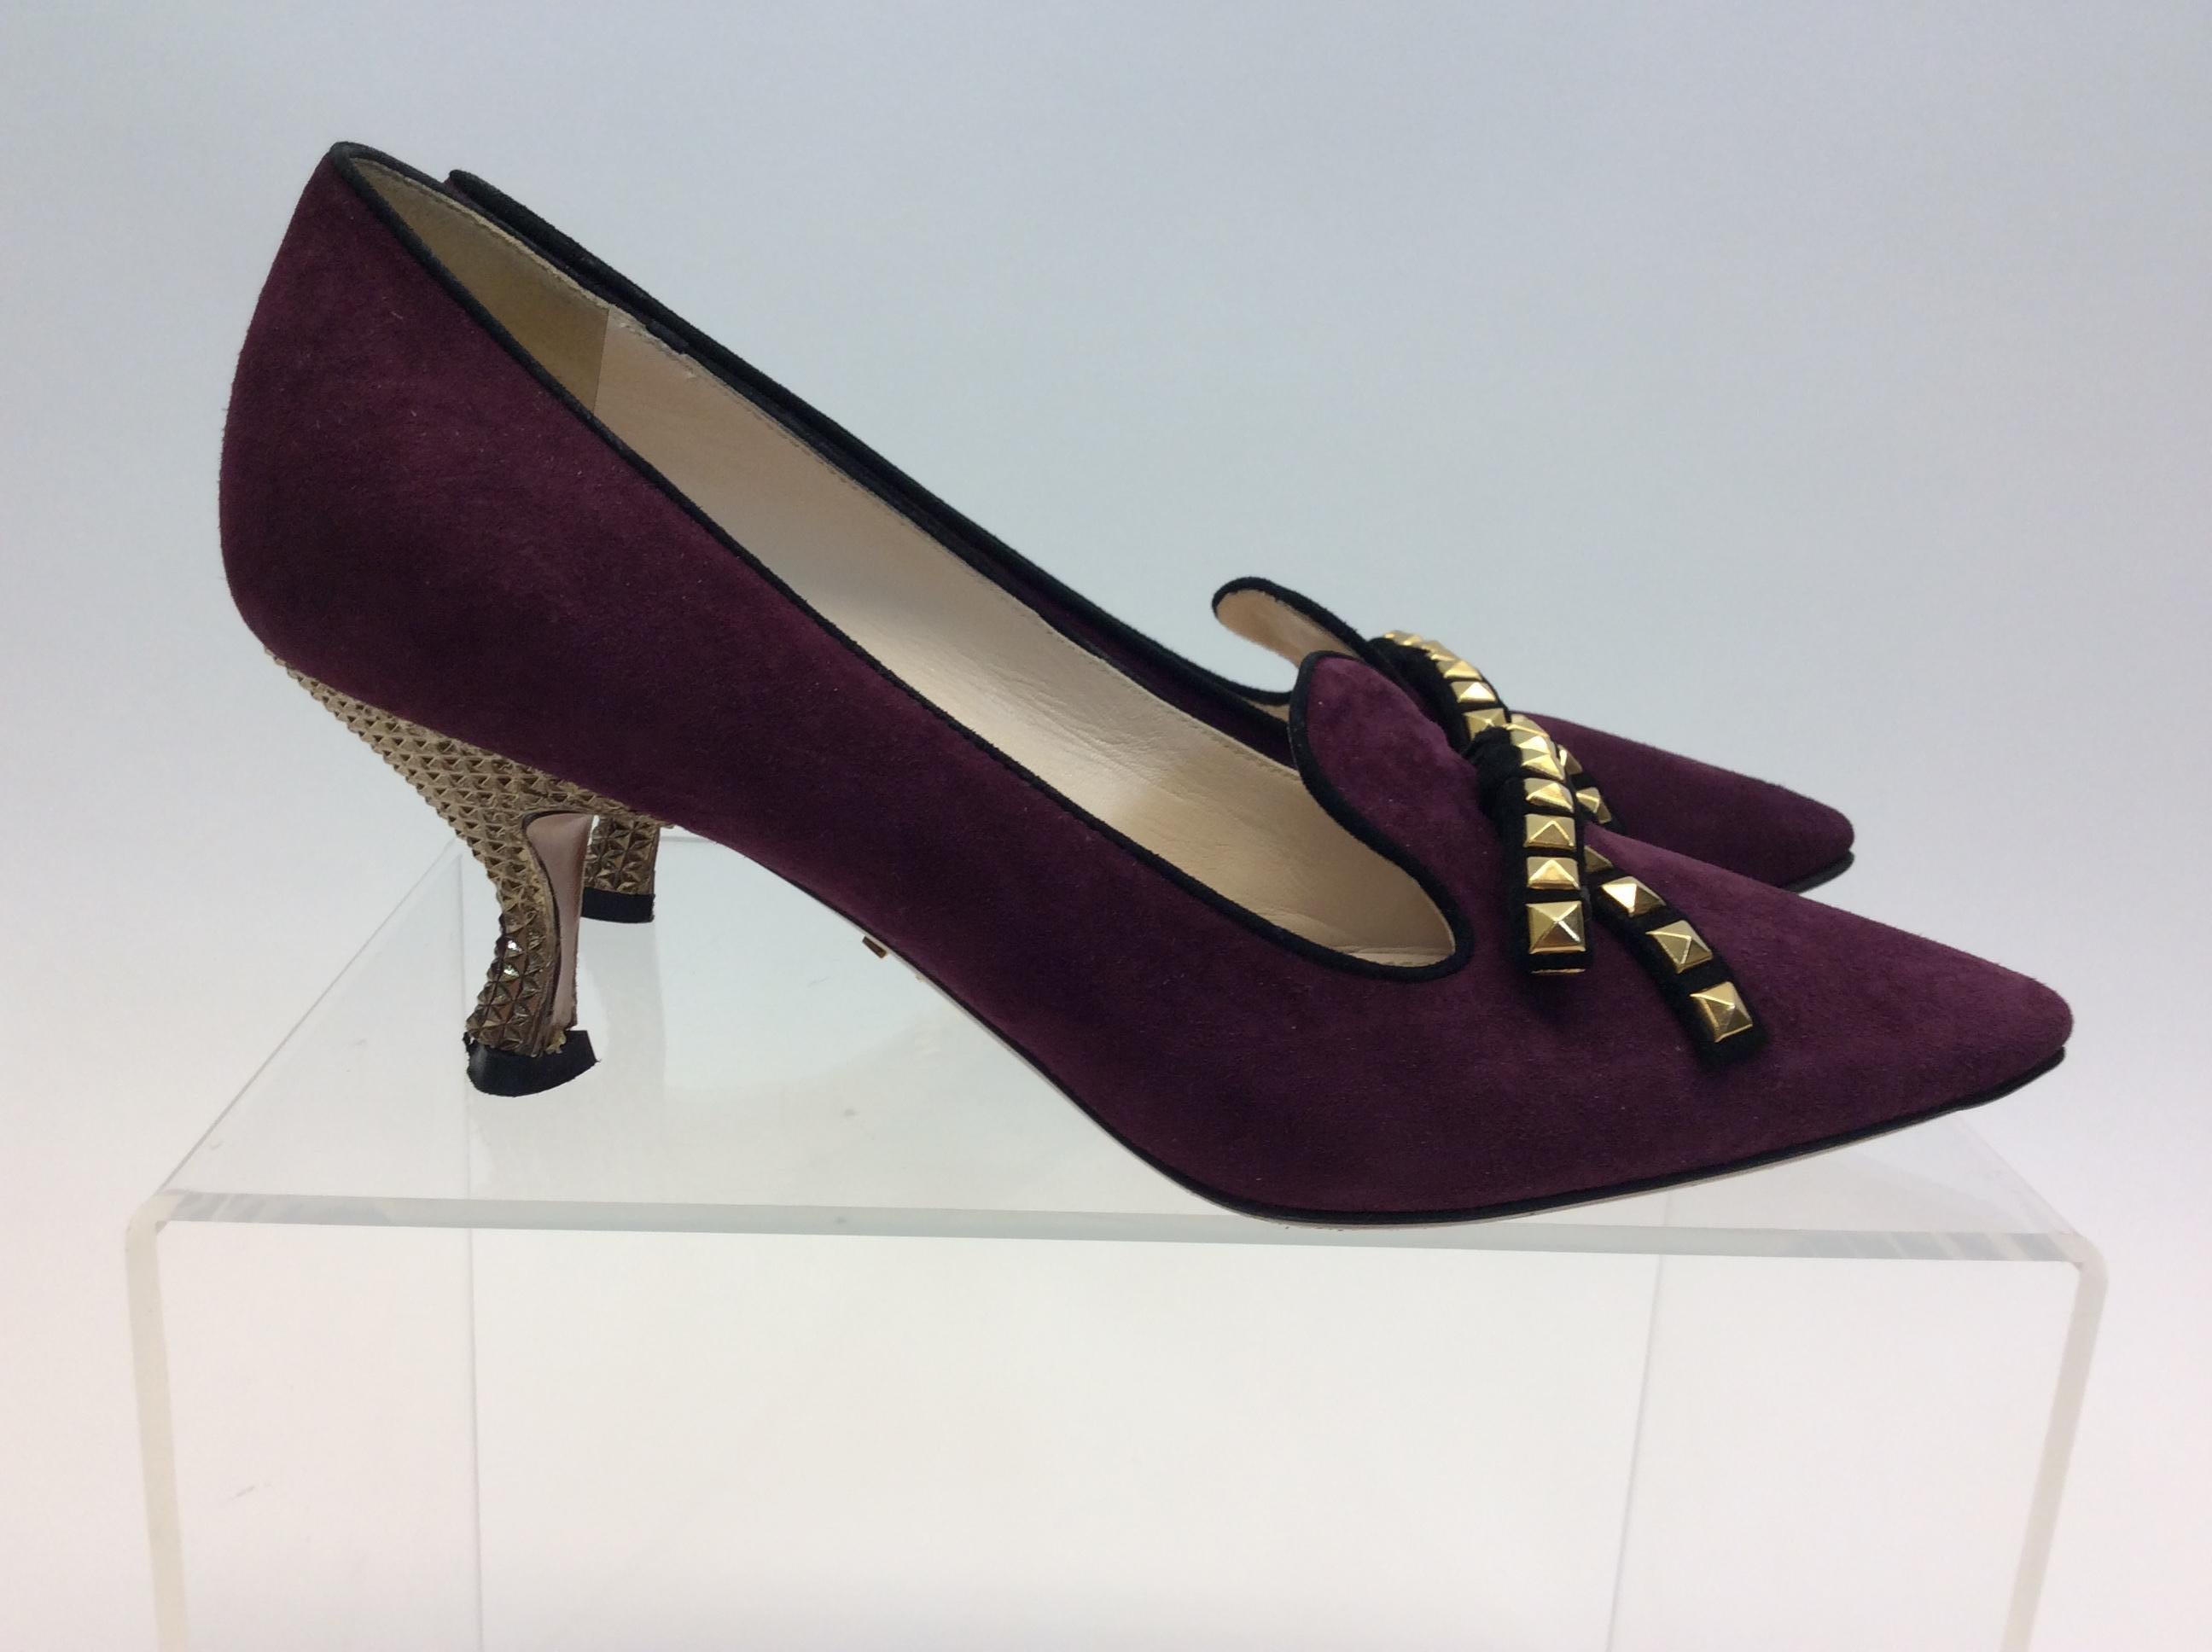 Prada Burgundy Suede Studded Pump In Good Condition For Sale In Narberth, PA